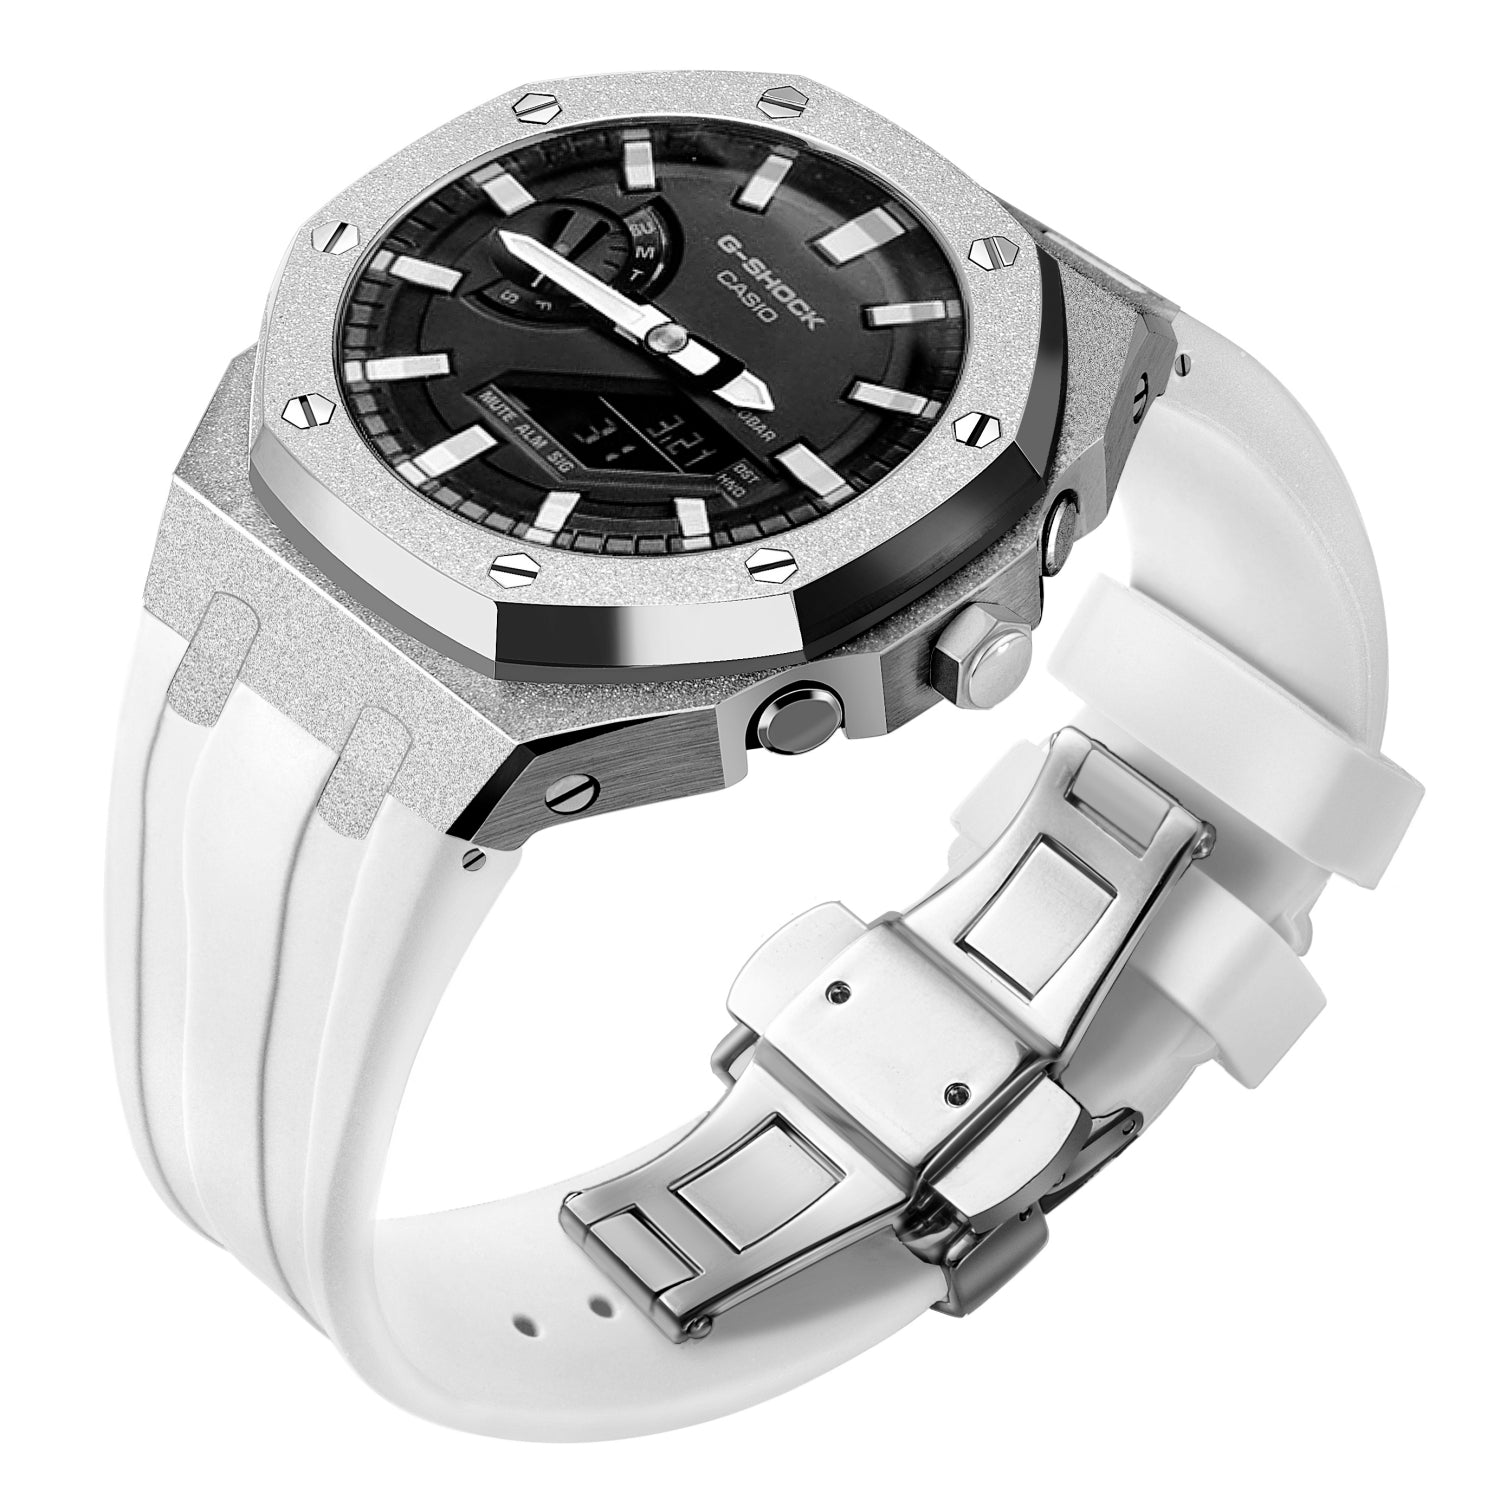 Luxury stainless steel case with Silicone strap for G-Shock GA2100【Shiny surface】 - CIVIBUY